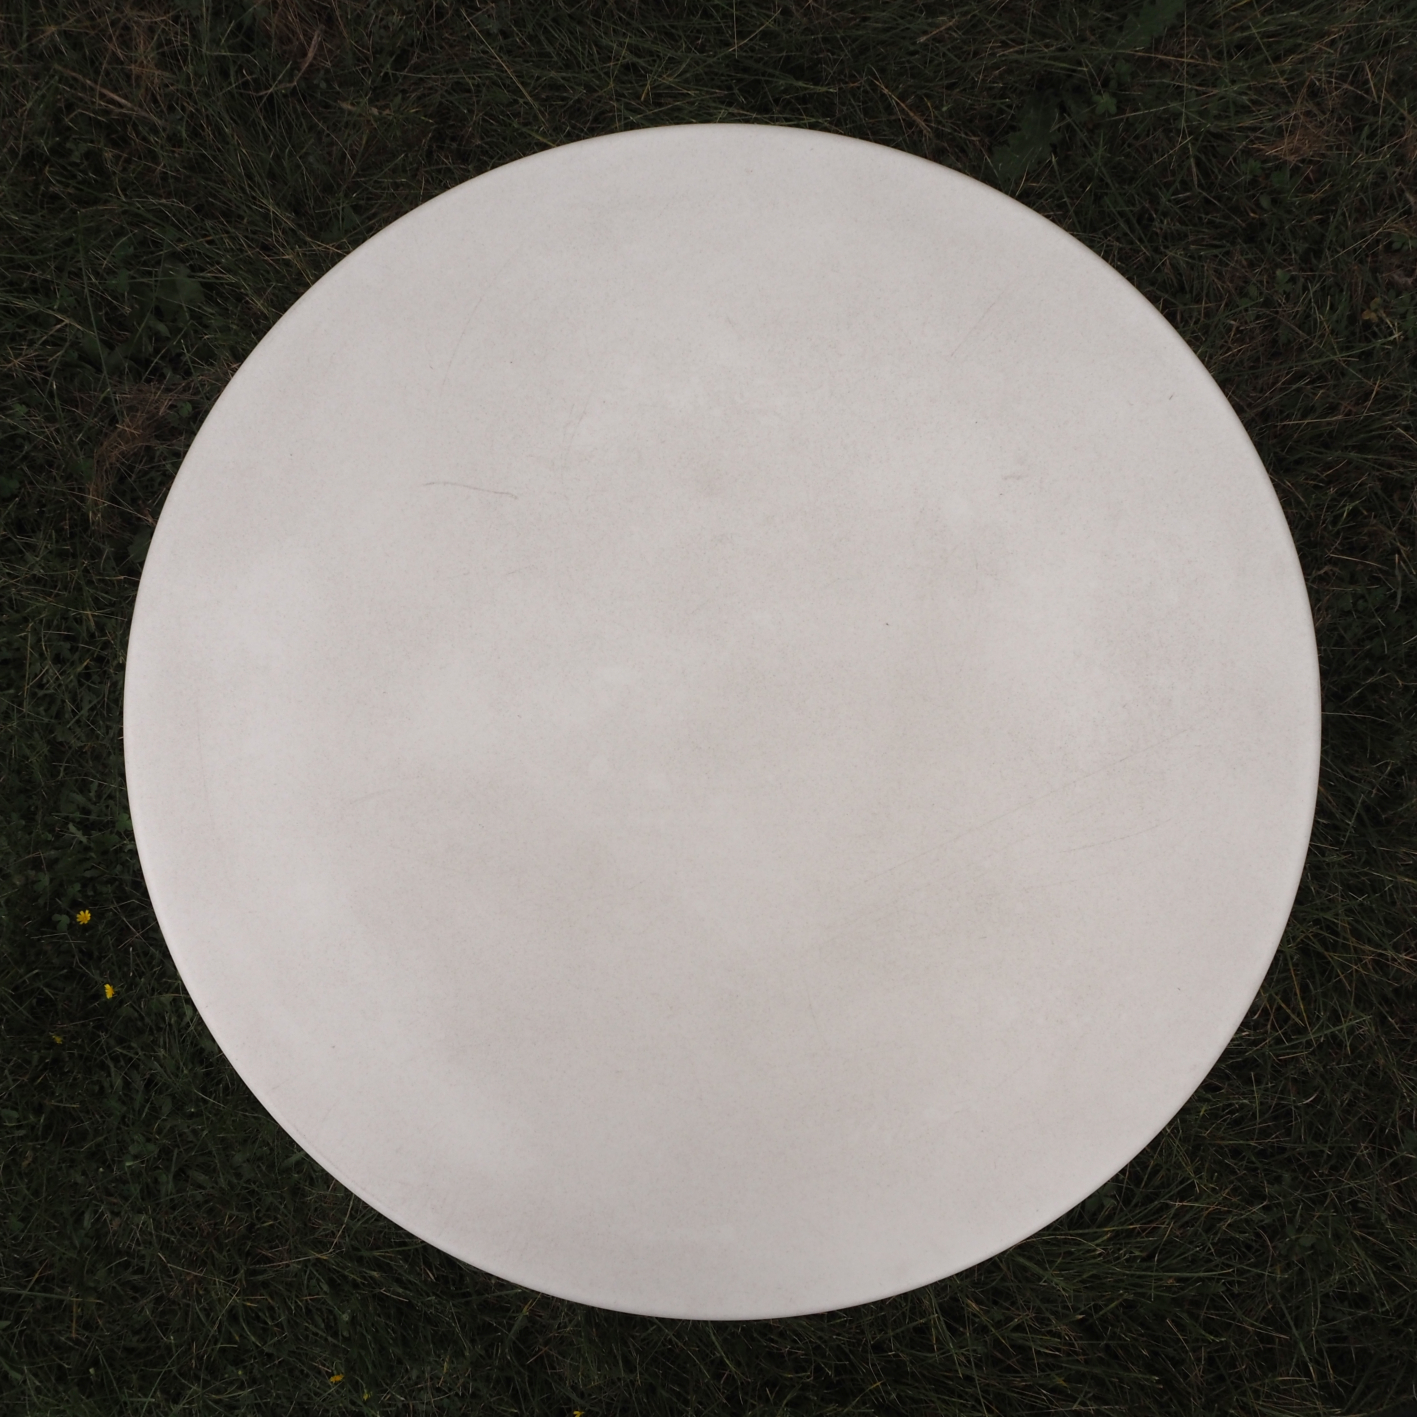 Round table 'Kissi Kissi' by Miki Astori for Driade (ca. 2004)